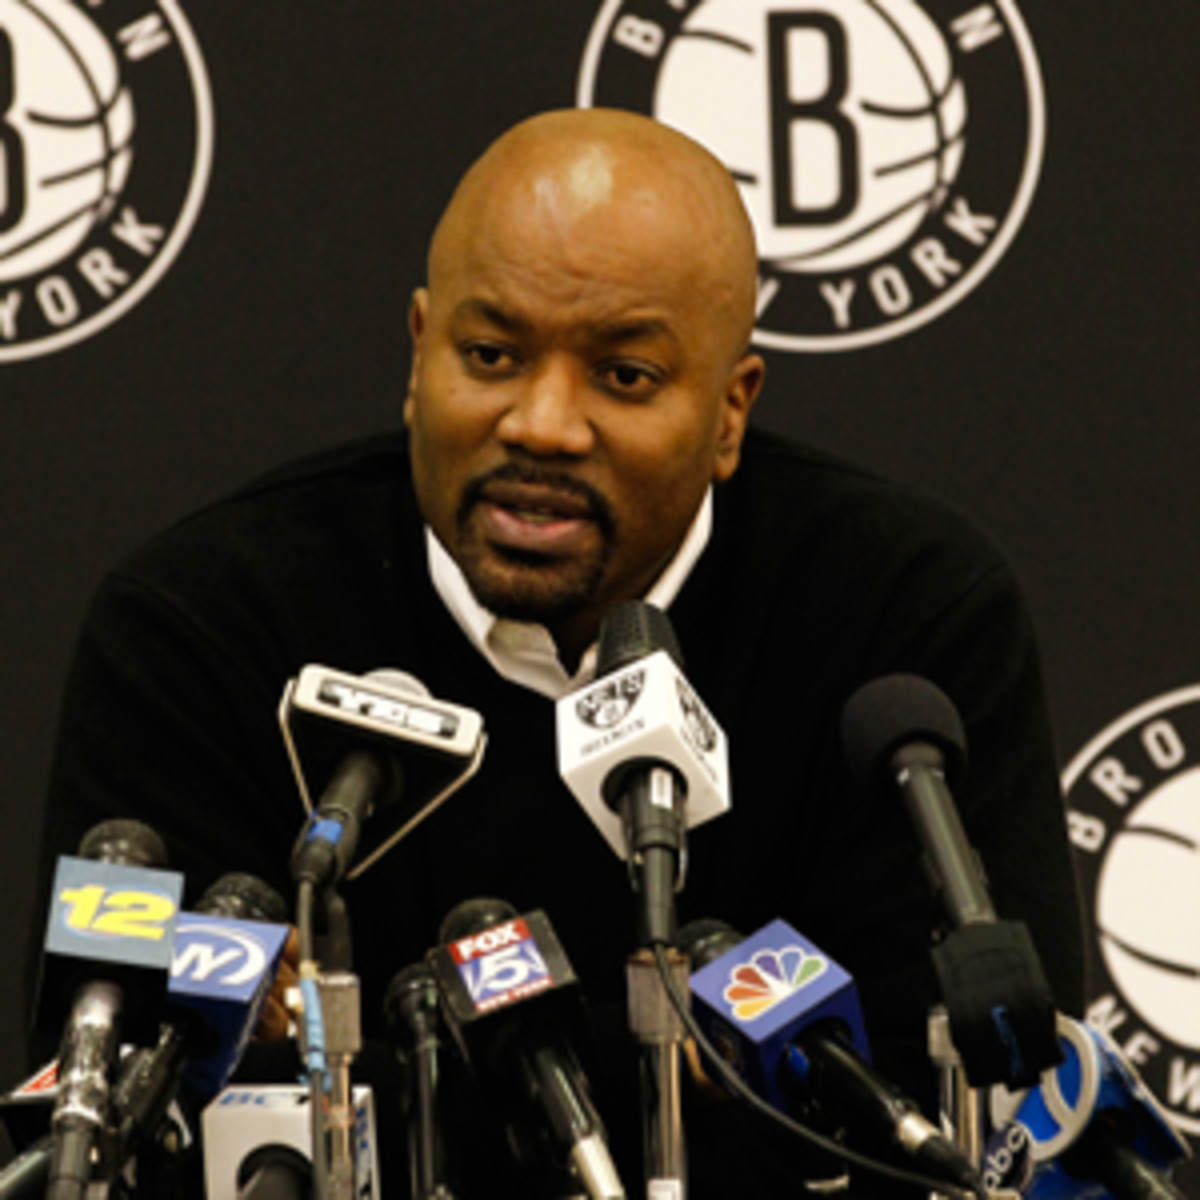 Billy King has revived the Nets since becoming general manager in 2010. (Jeff Zelevansky/Getty Images)